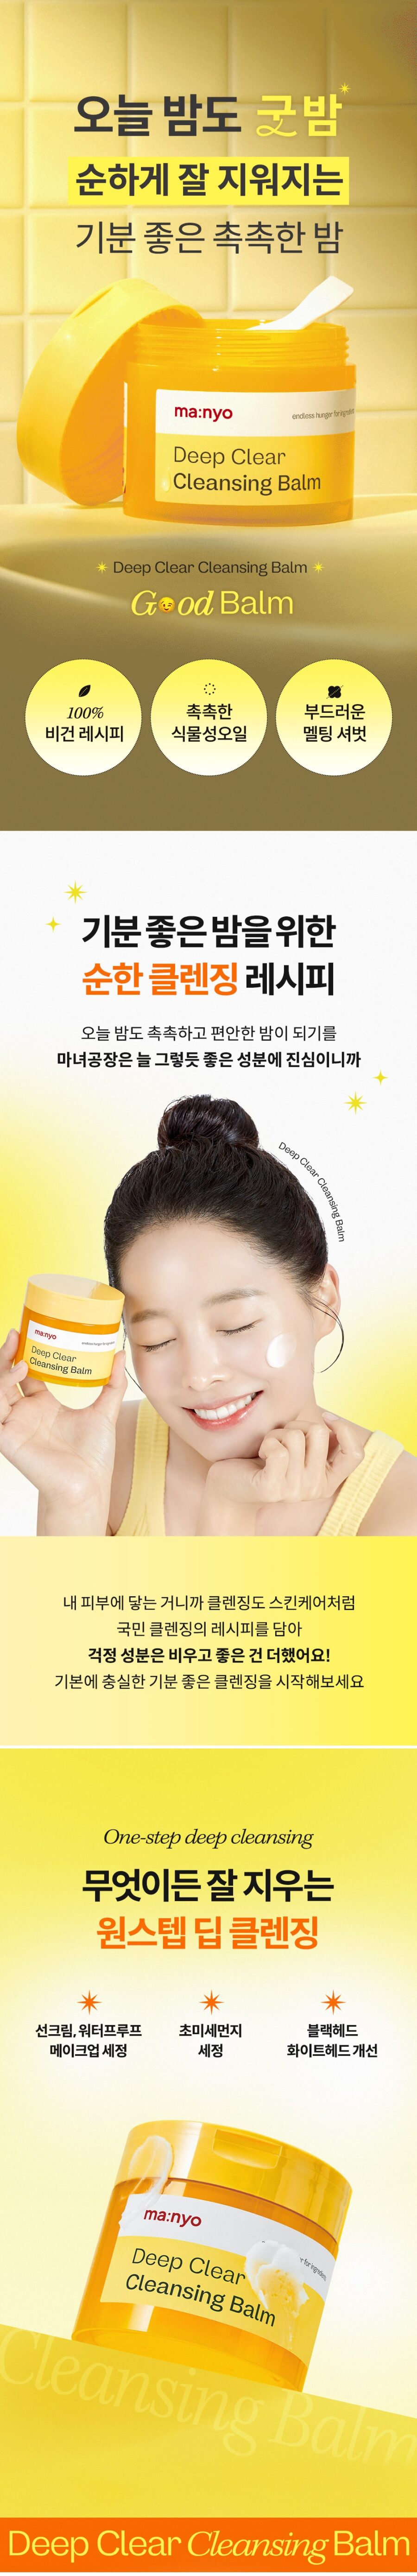 Manyo Factory Deep Clear Cleansing Balm korean skincare product online shop malaysia thailand singapore1